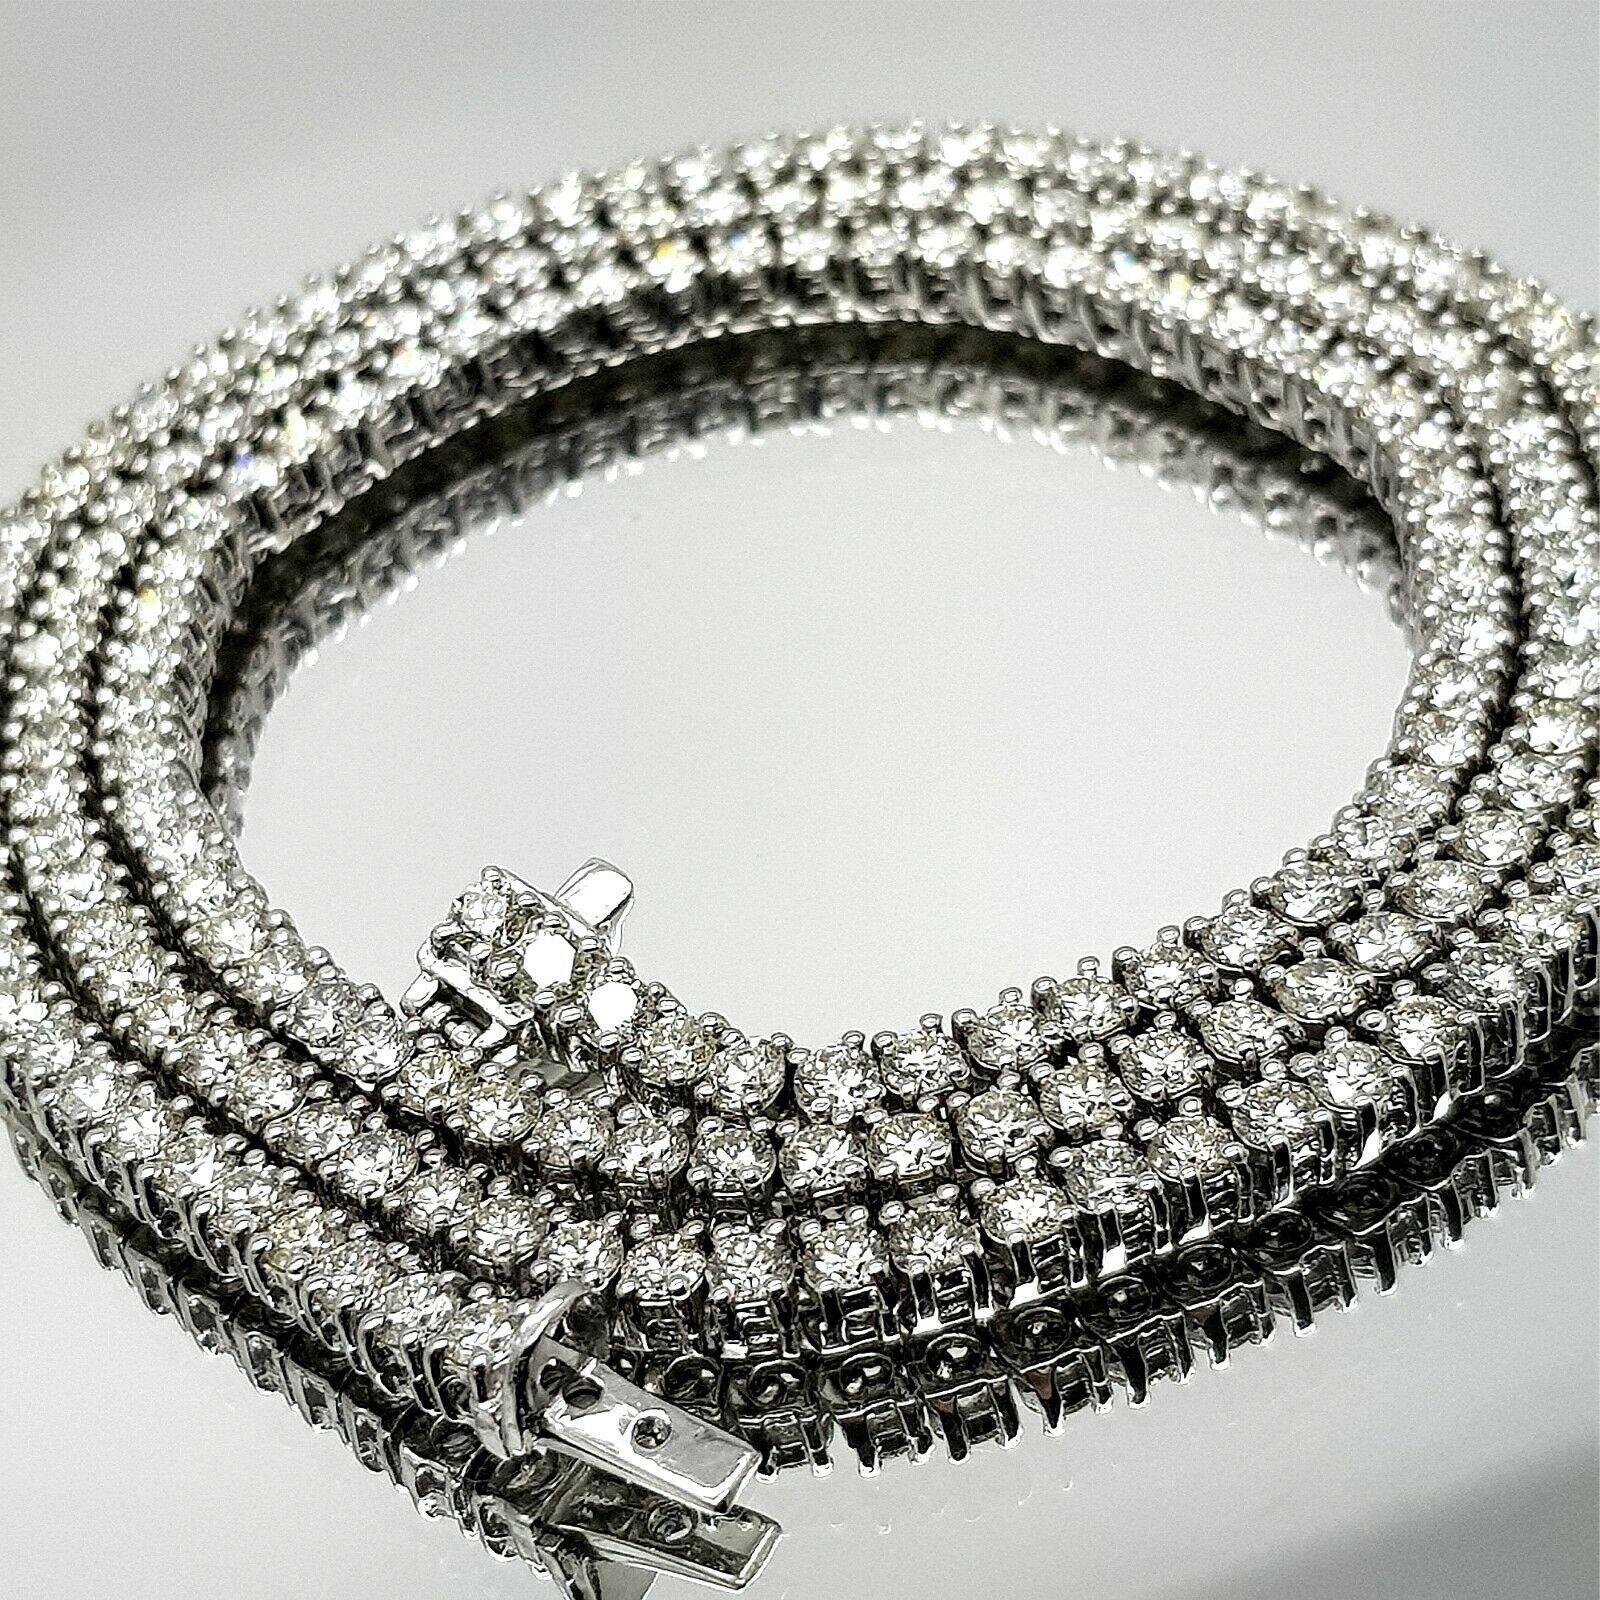 About
18k white gold 4 prong diamond necklace, containing 
 Specifications:
    main stone: ROUND CUT DIAMONDS
    diamonds: 136 PIECES
    carat total weight: 16.98cts.
    color: F-G
    clarity: VS1-2
    brand: custom
    metal:  18K GOLD
   